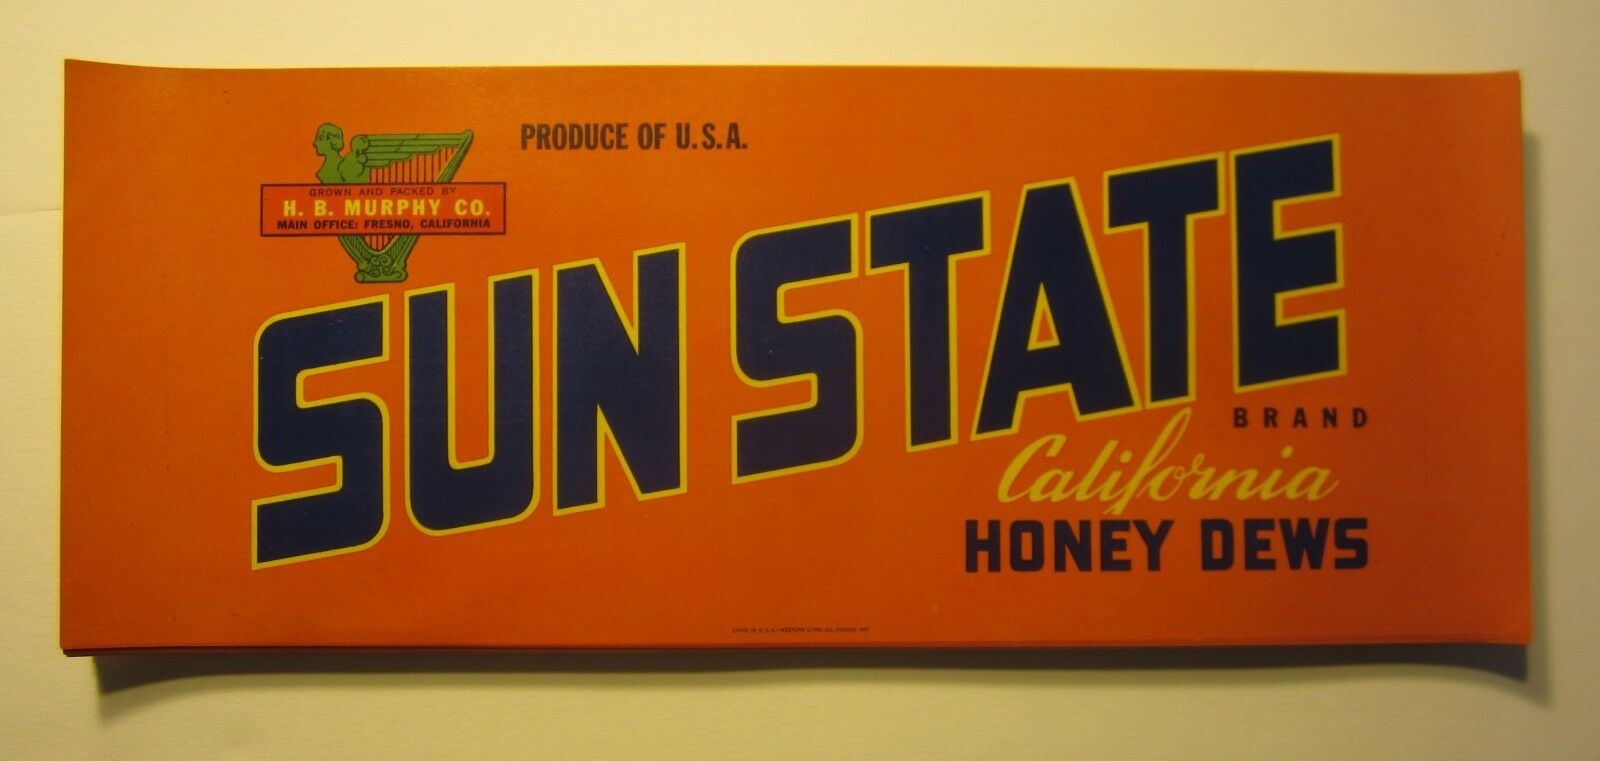  Lot of 100 Old Vintage SUN STATE California Ho...